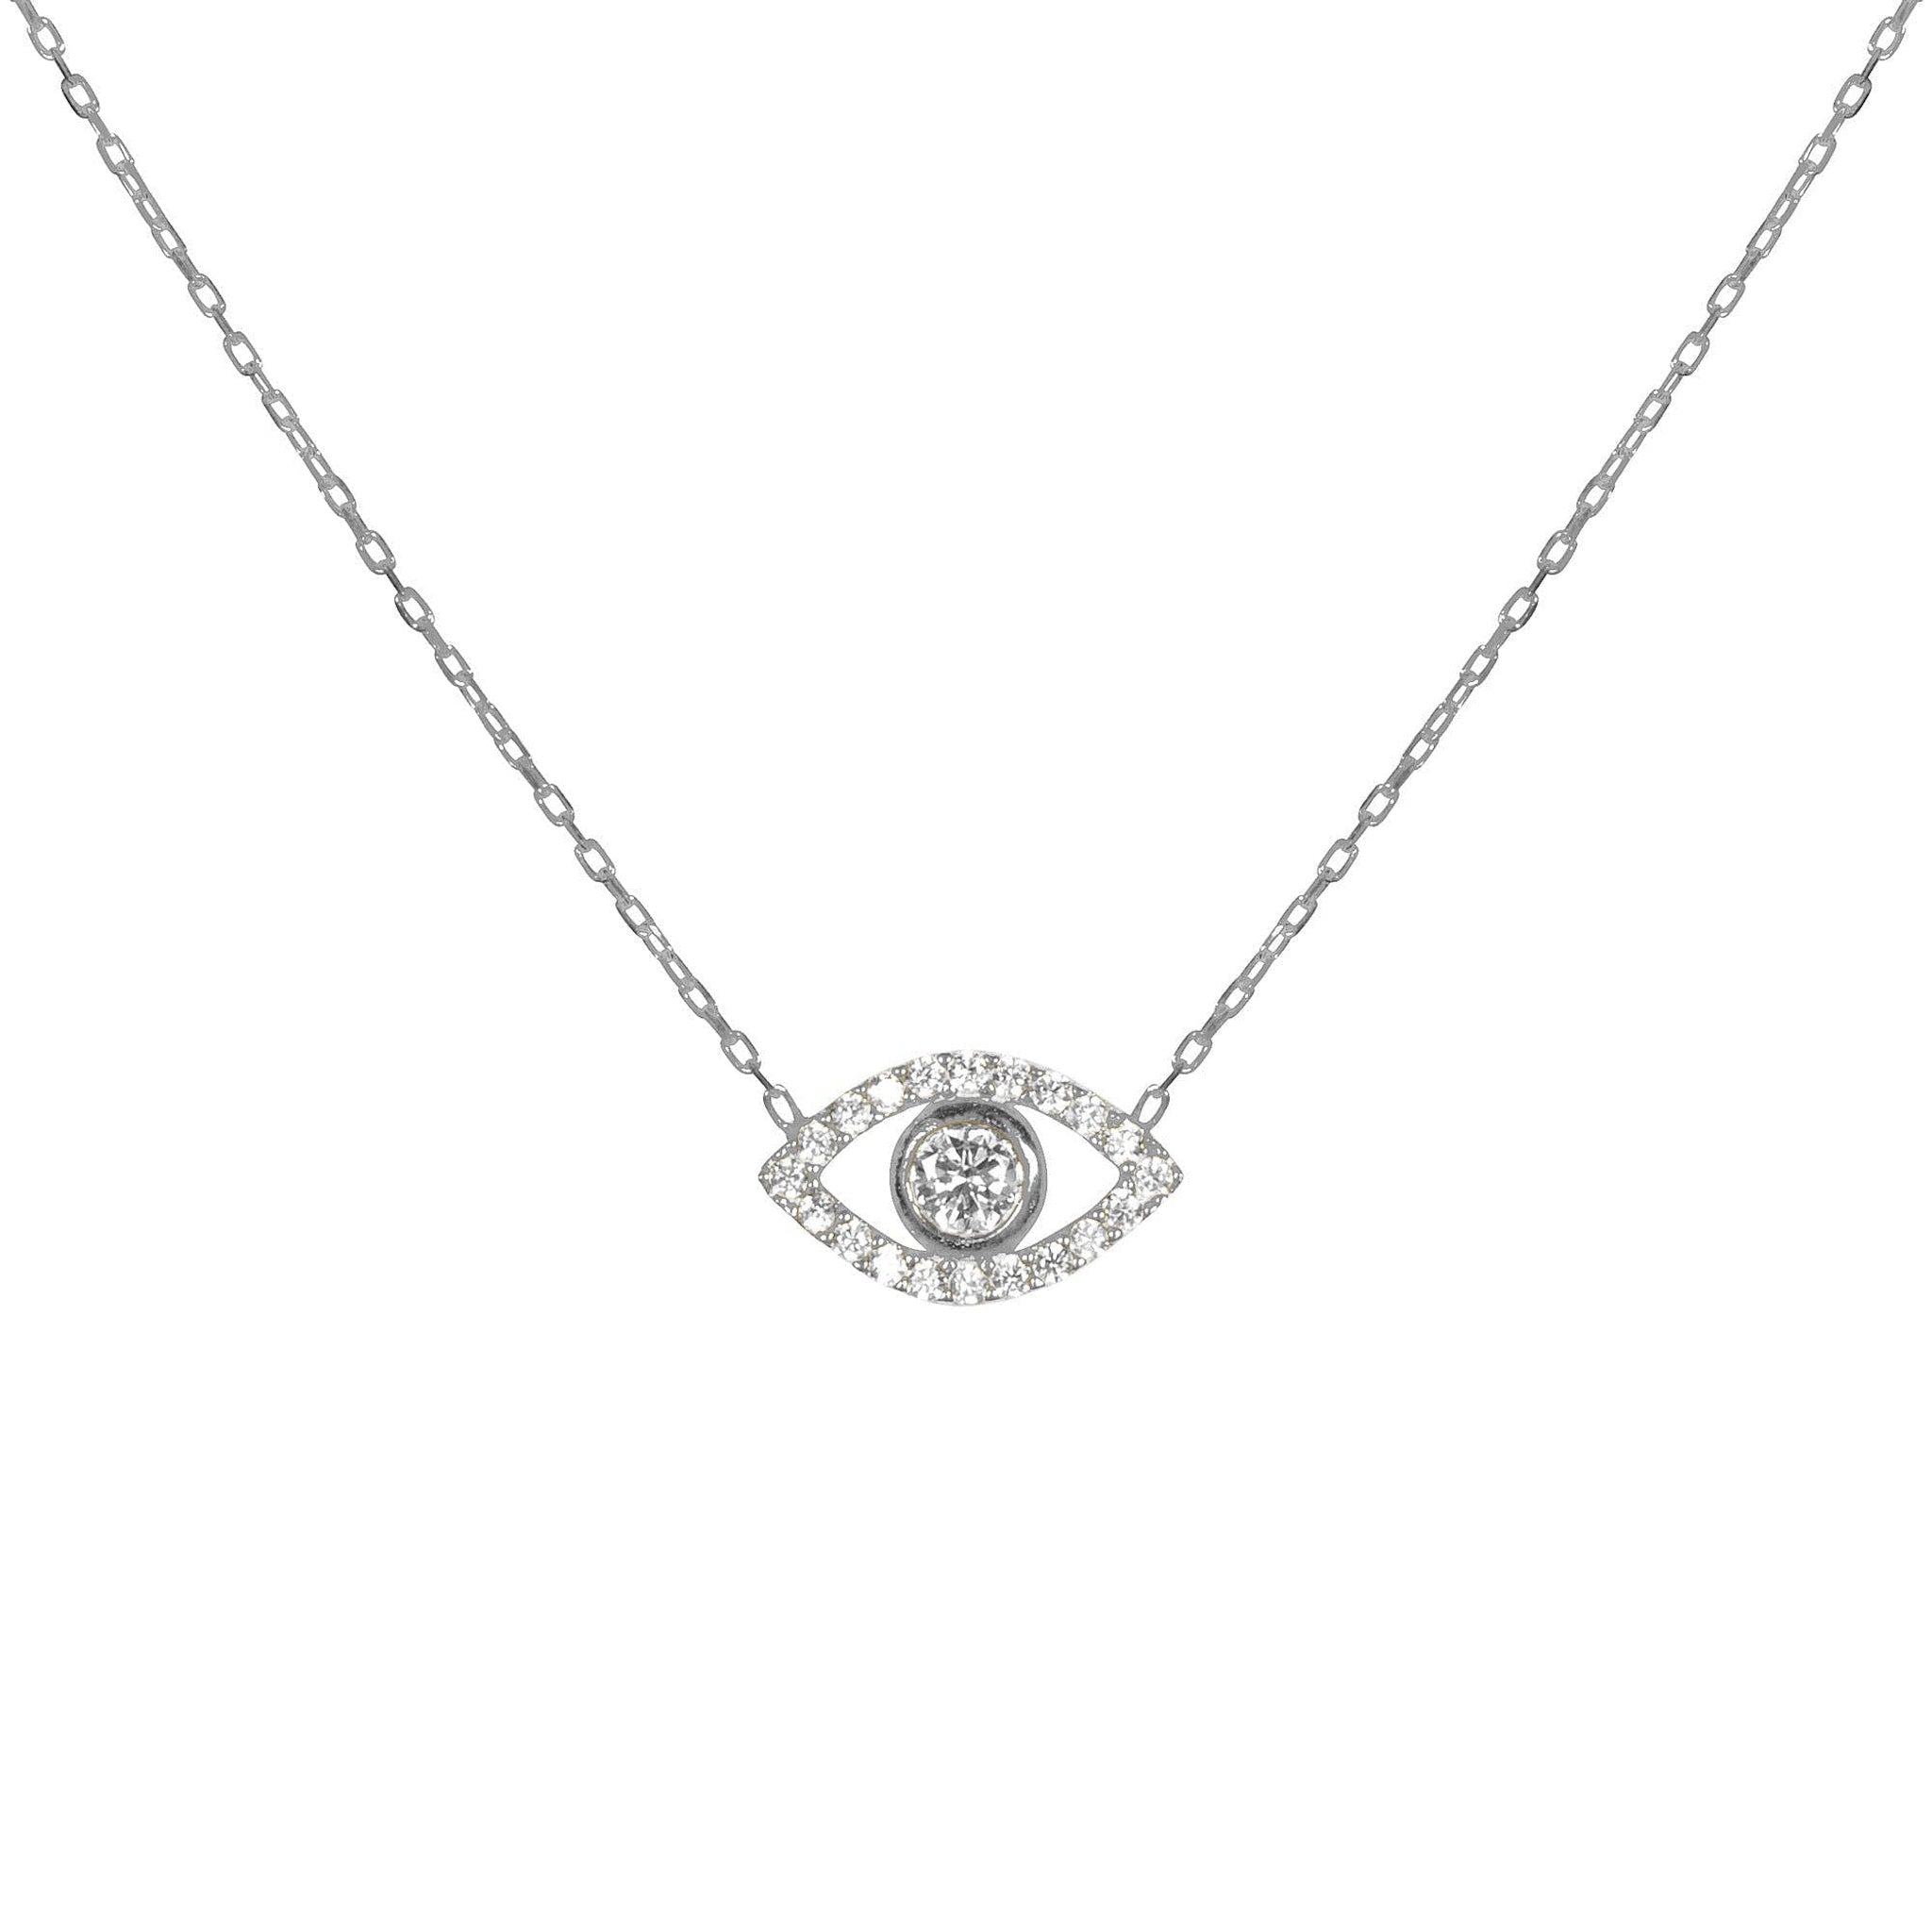 “Ojos” Sterling silver clear eye necklace - Free Gift